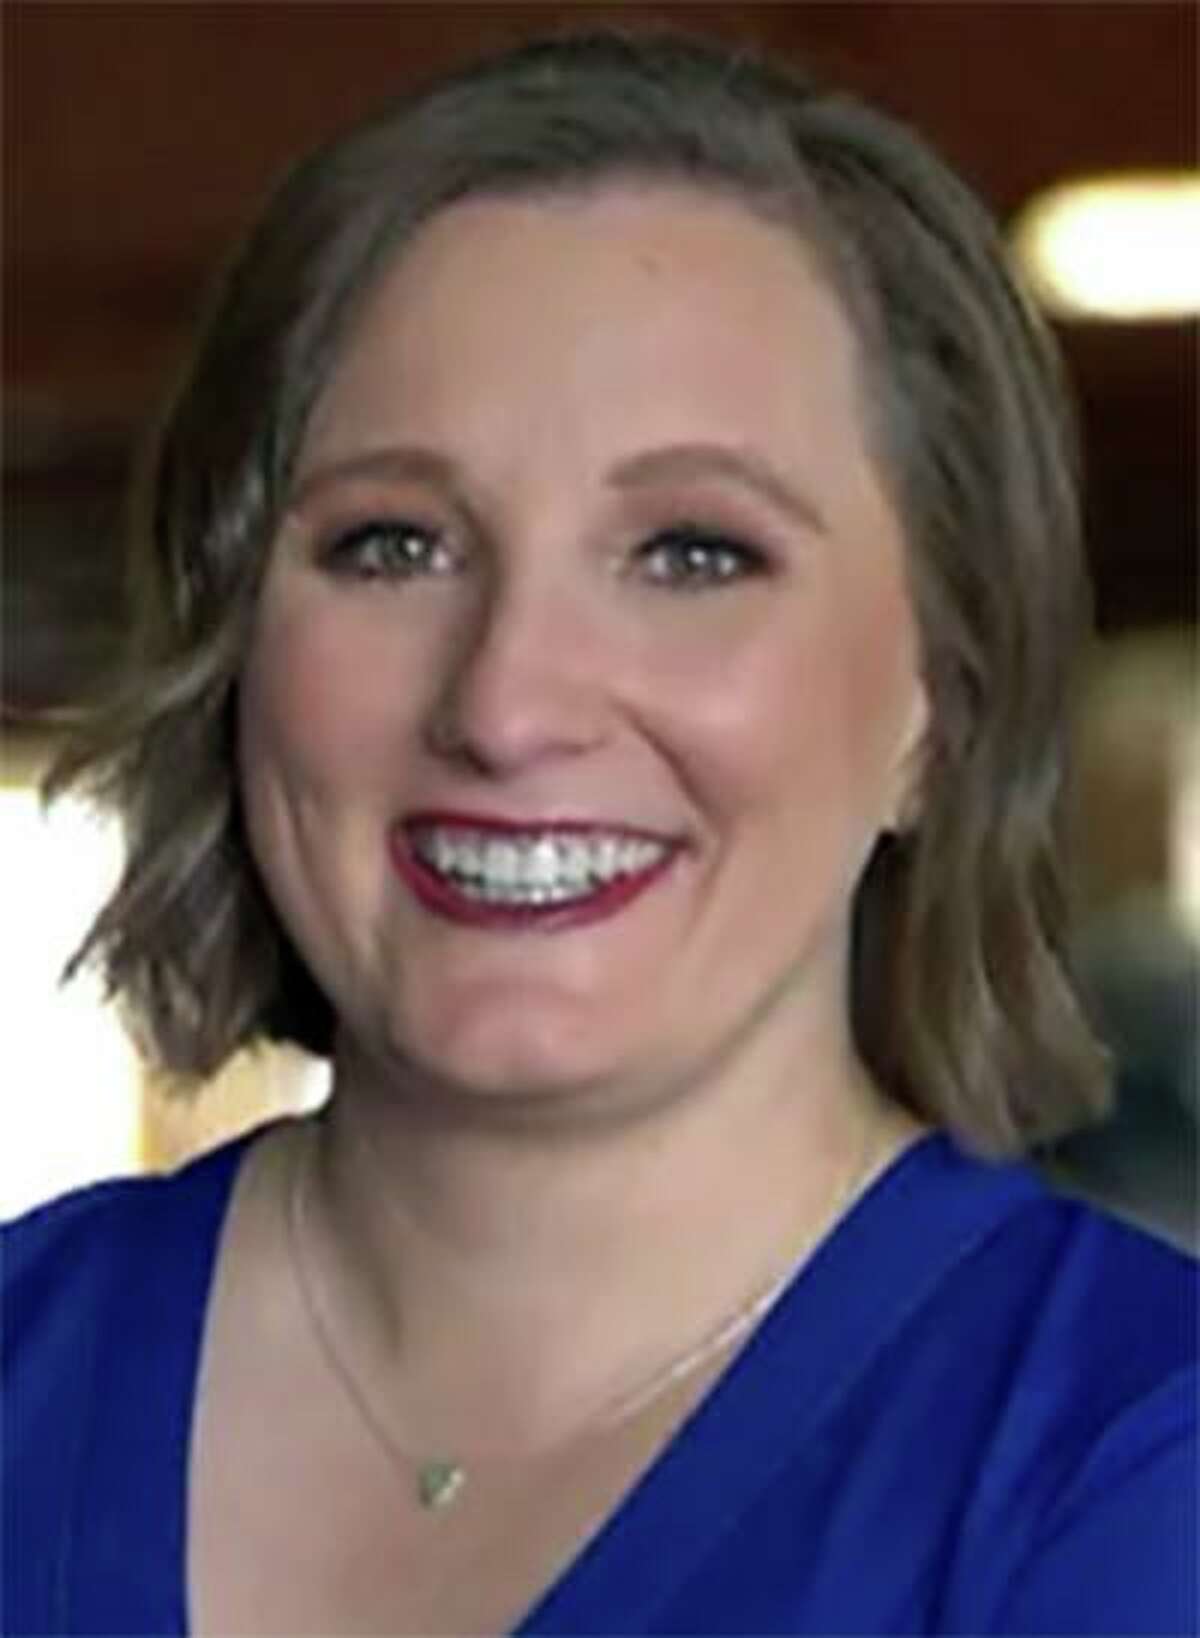 Democrat Morgan LaMantia remains the winner of the race for Senate District 27, a battleground state Senate seat in South Texas, after a recount.